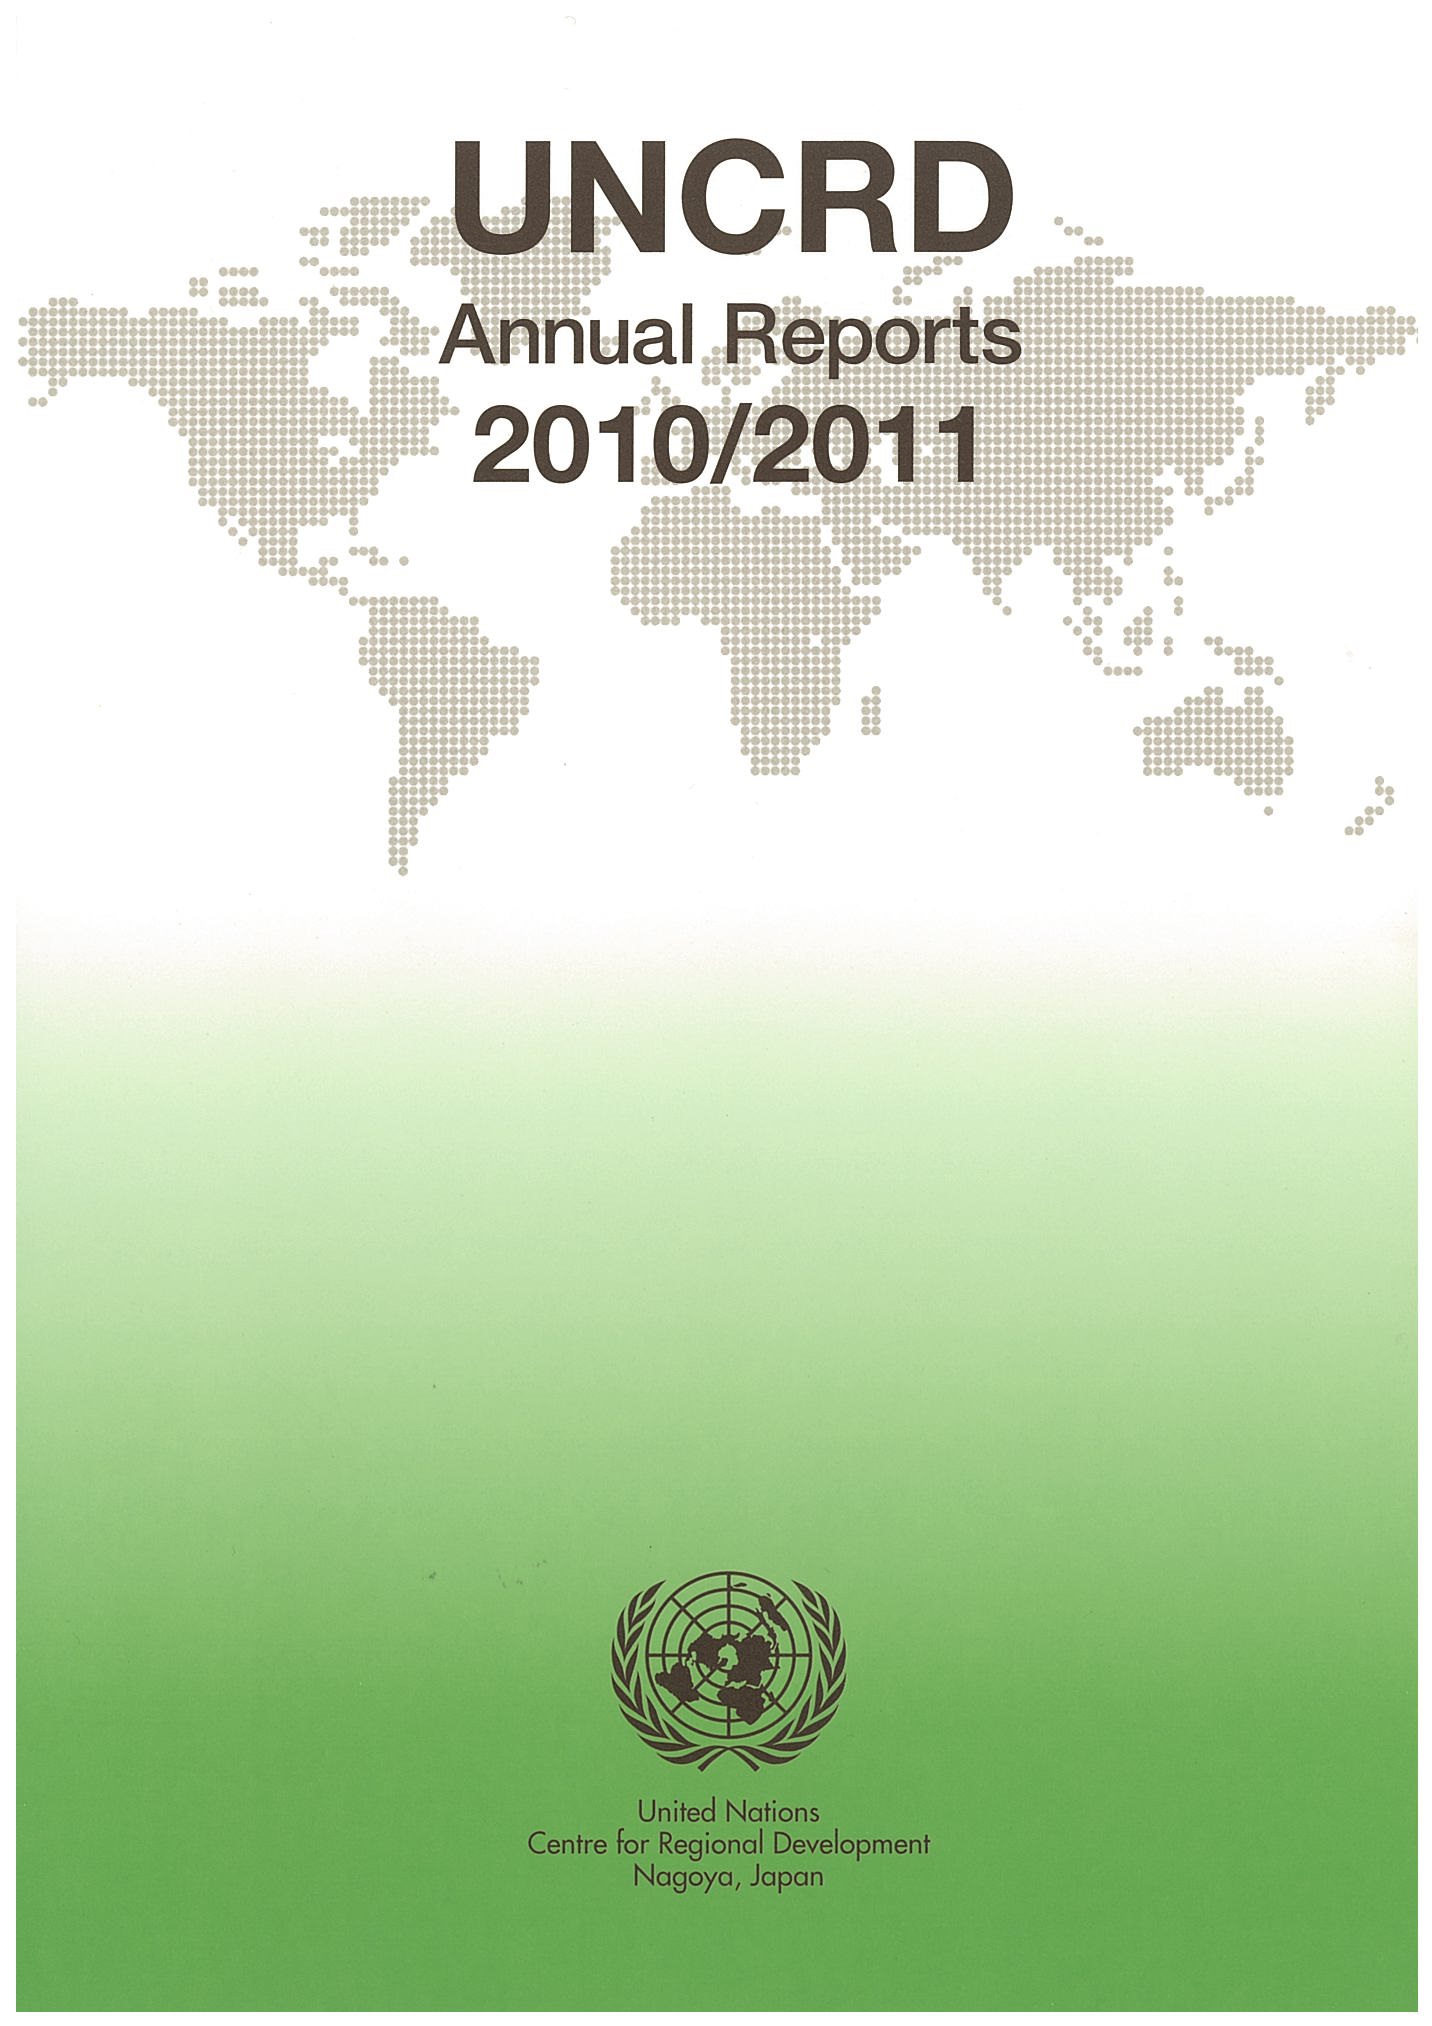 Cover of the UNCRD Annual Reports 2010/2011